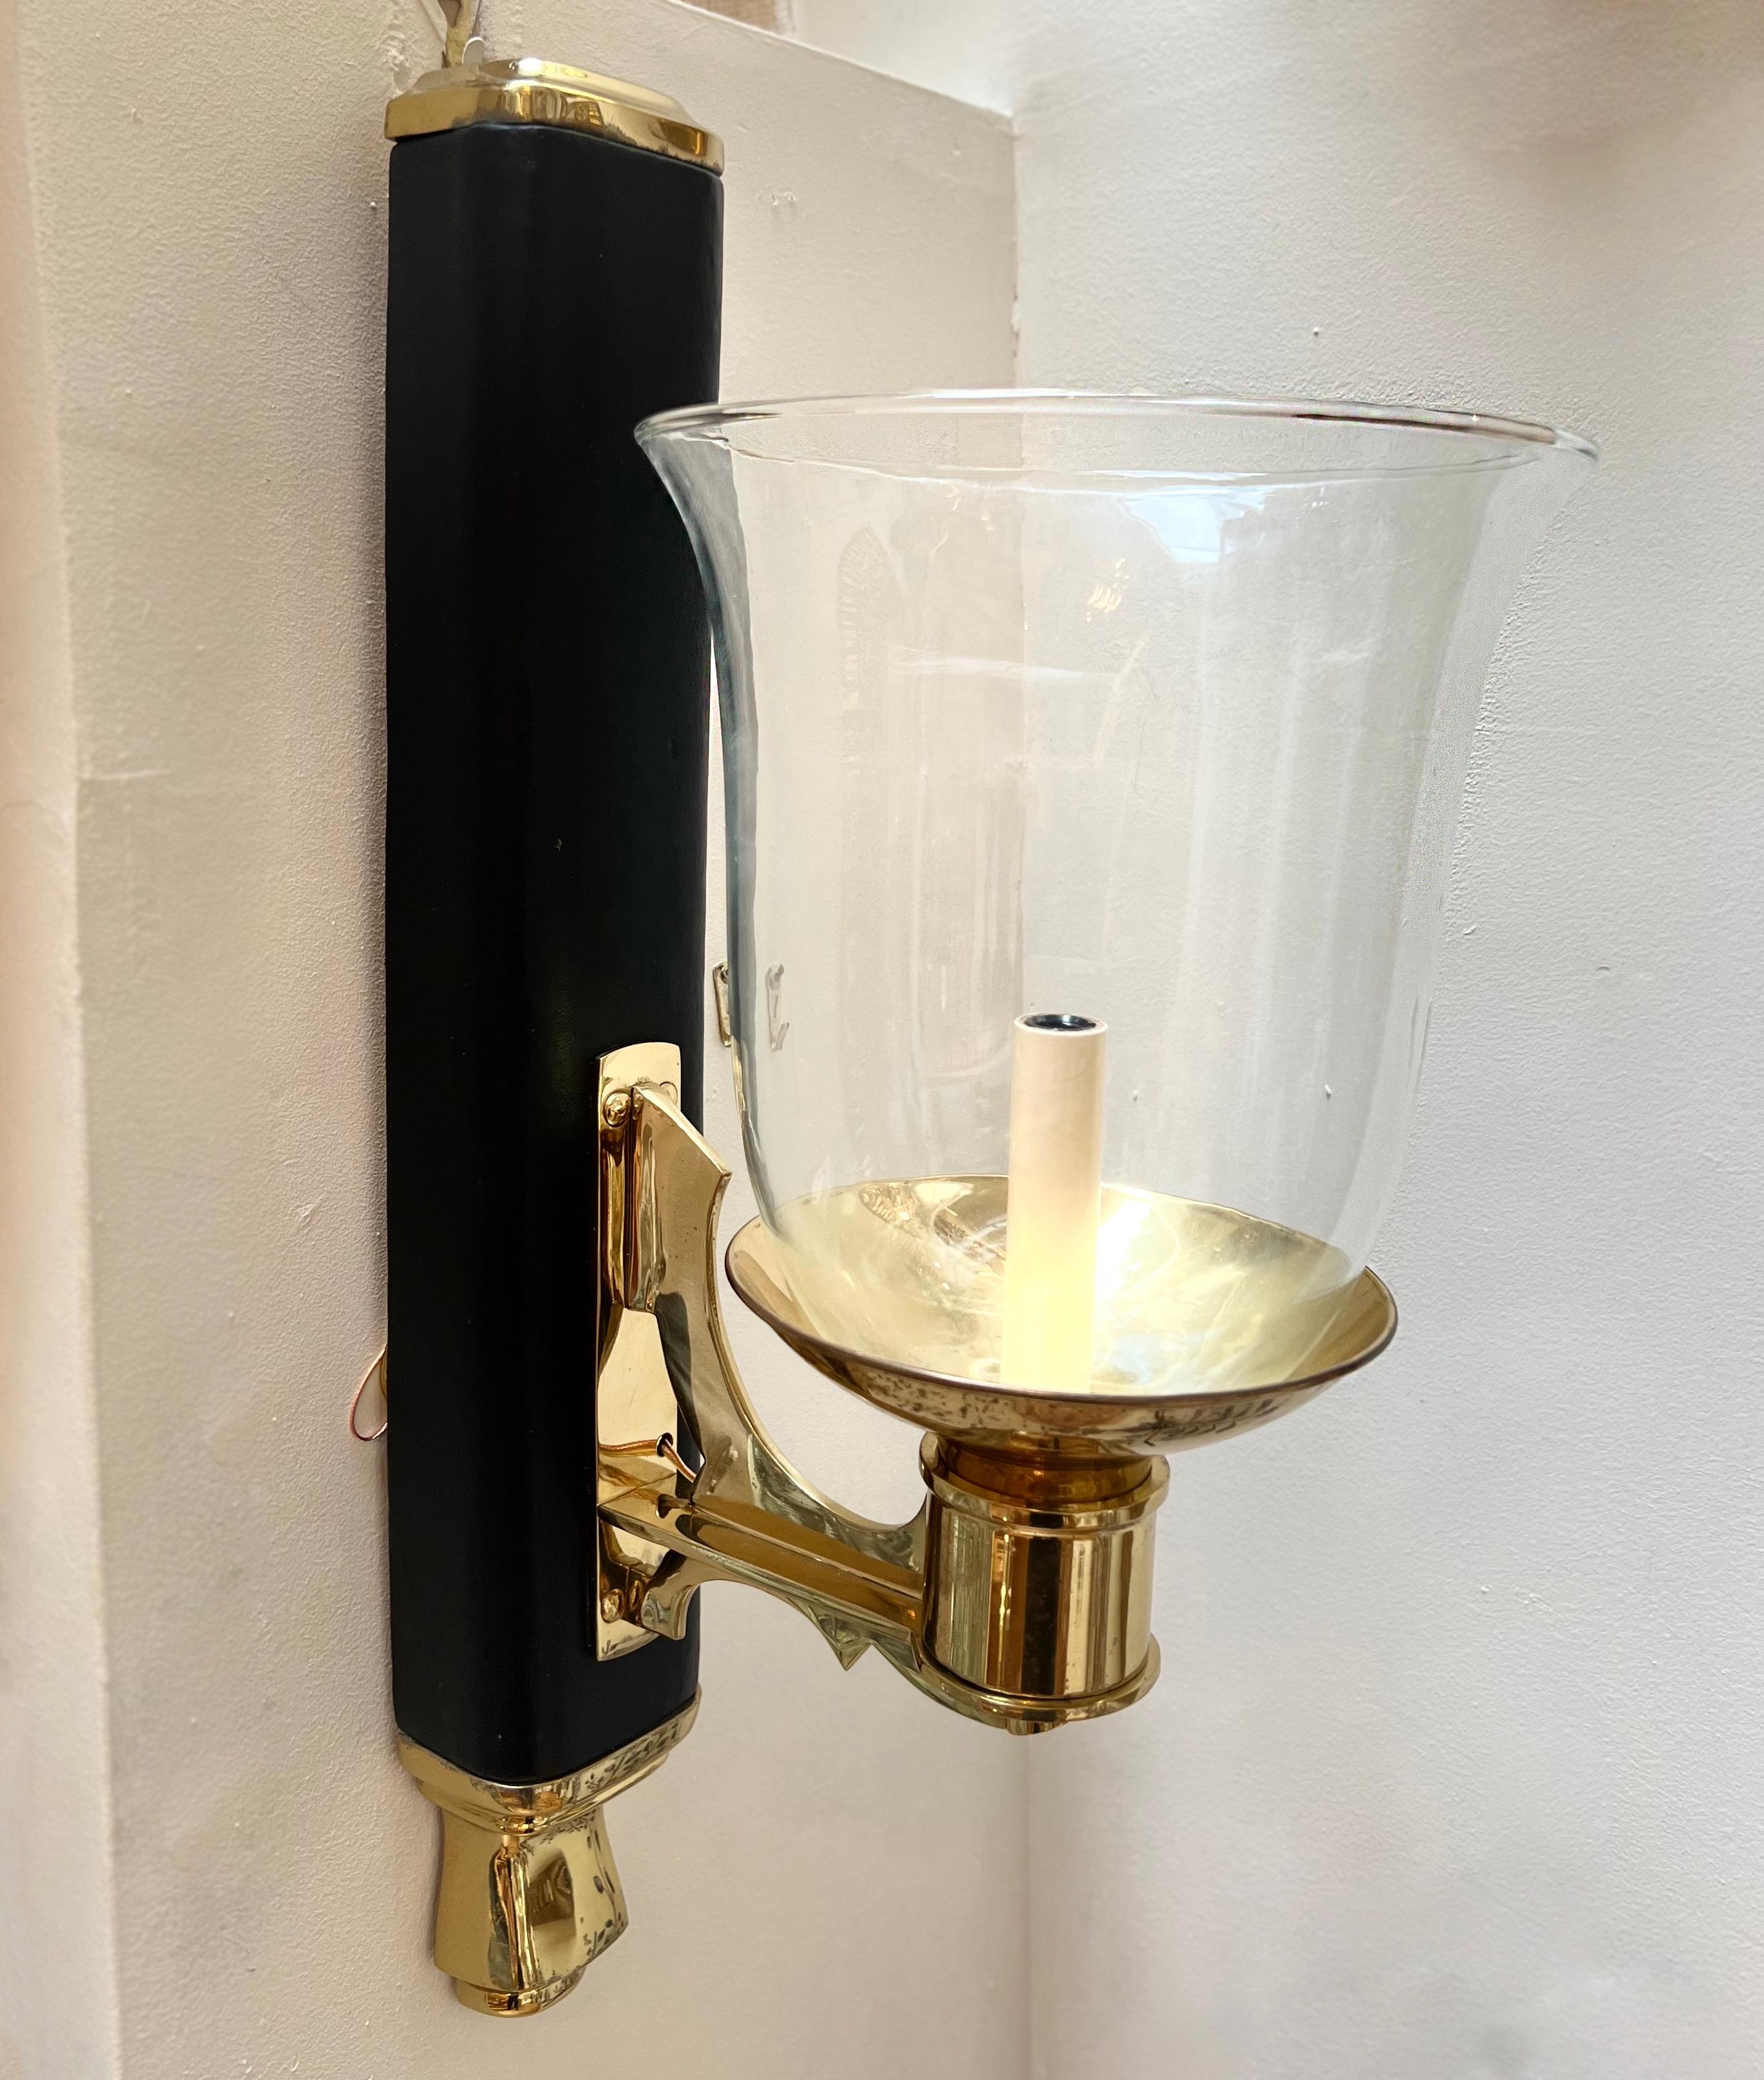 Pair of Italian 1960s leather and bronze sconces with glass hurricanes.

Measurements:
Height: 23.5